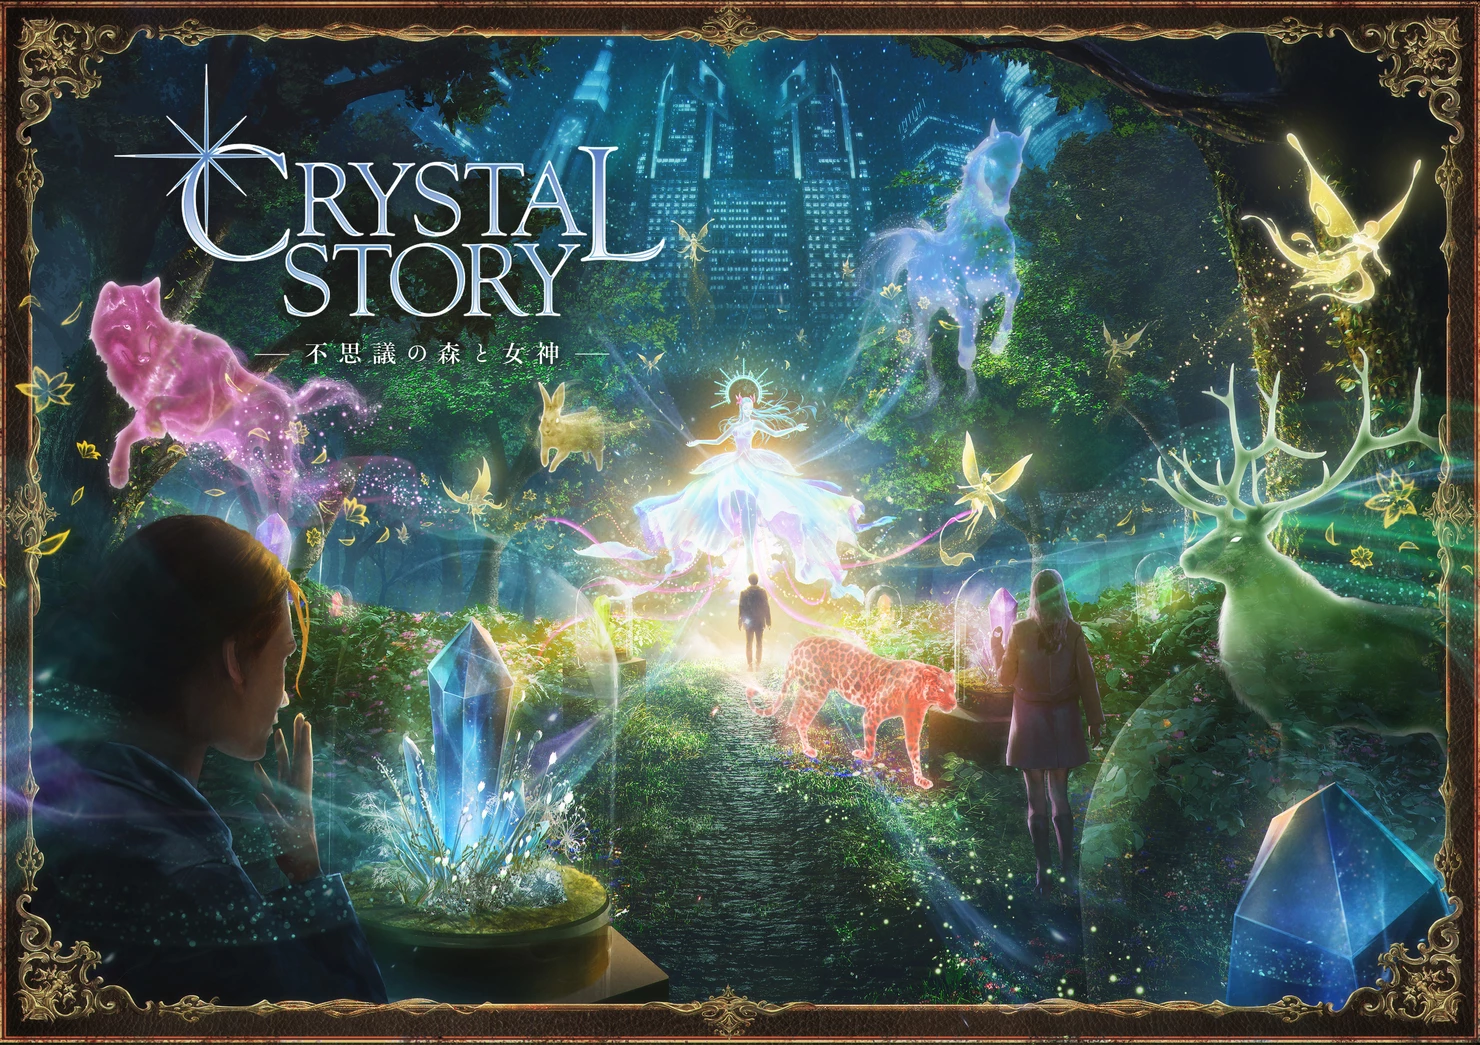 SQUARE ENIX Night Walk  “CRYSTAL STORY – Forgotten Forest and Goddess”